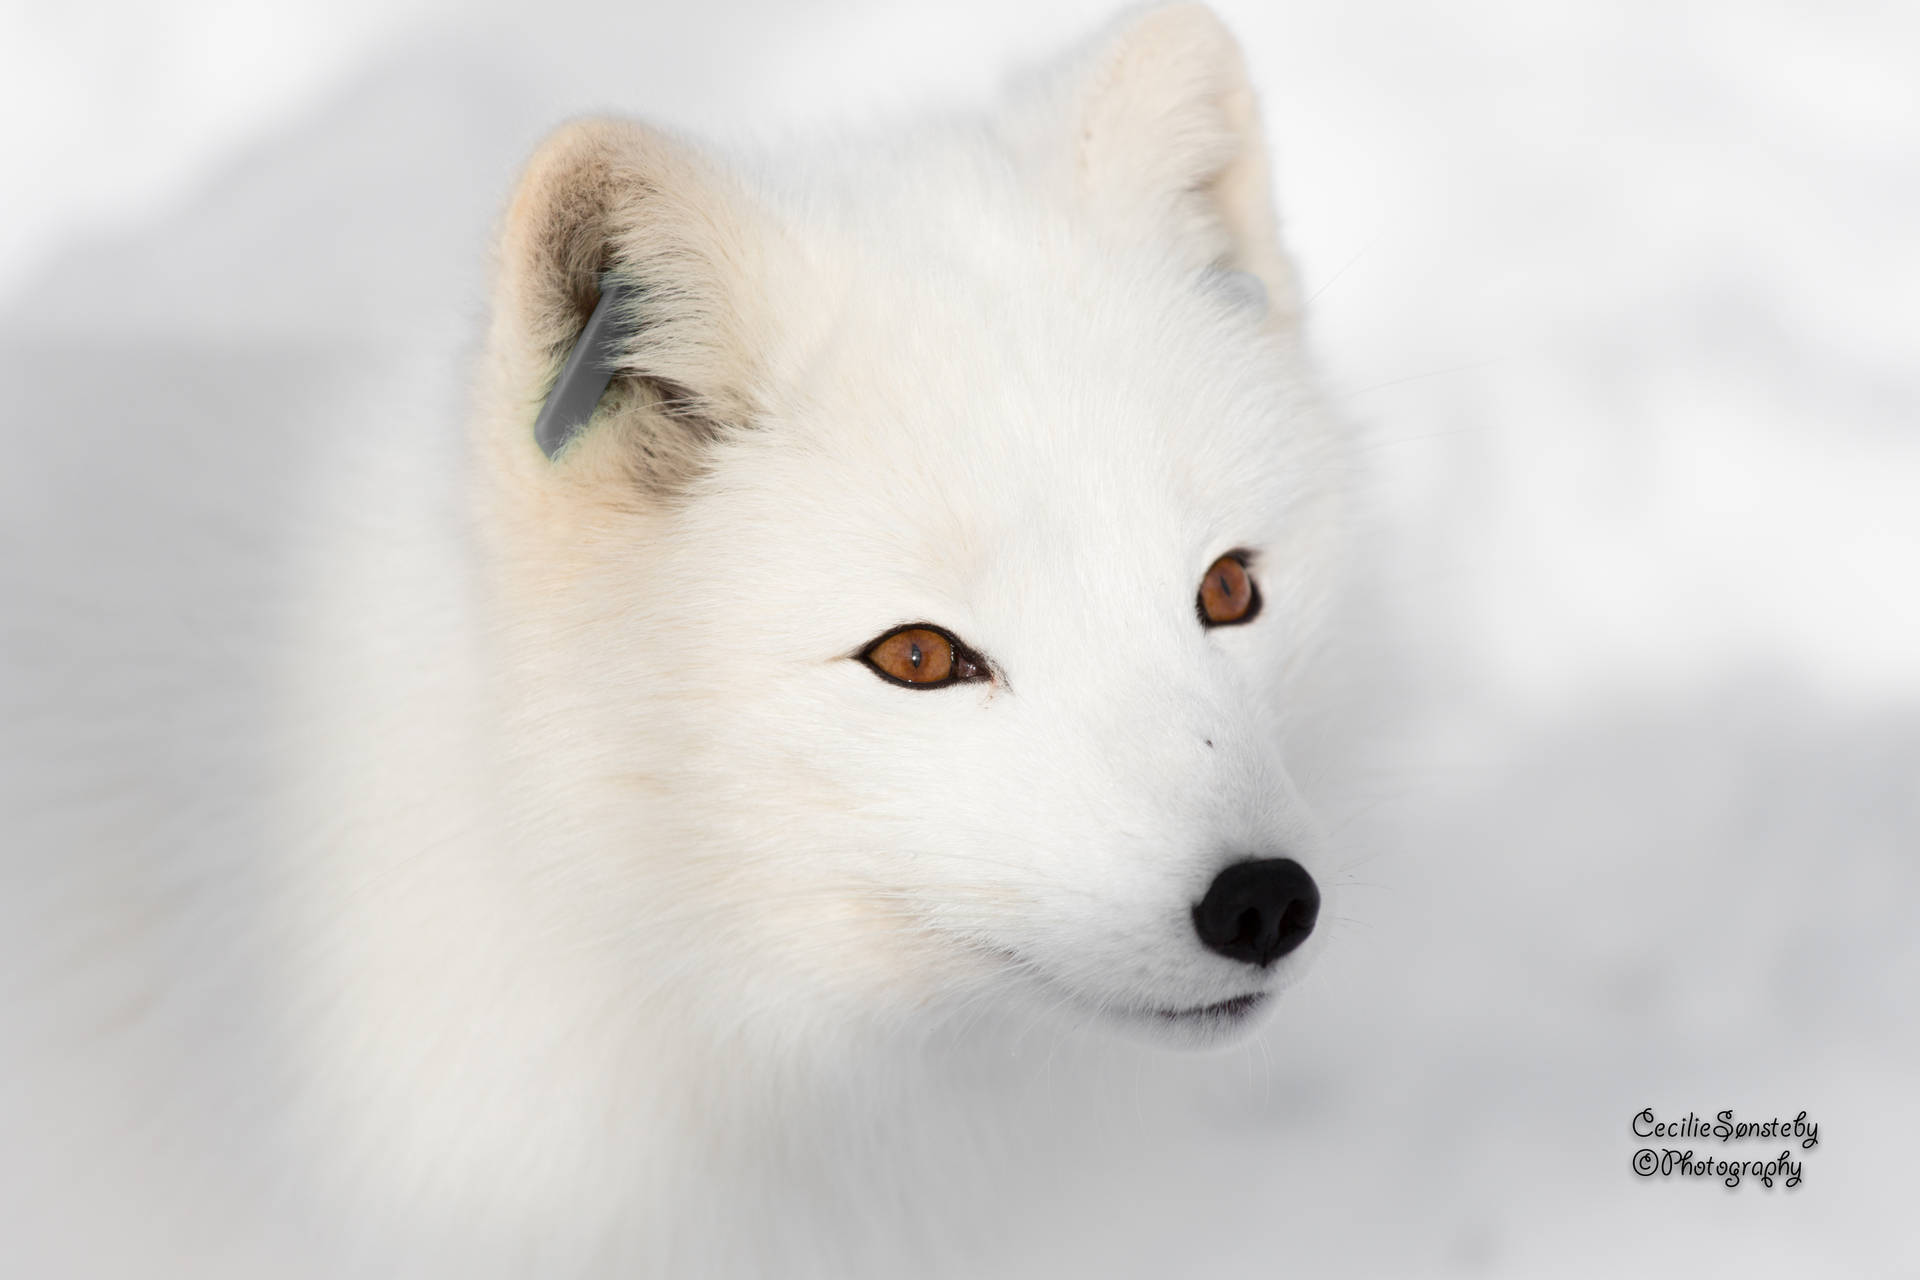 A White Fox In Serene Snow Surroundings. Background